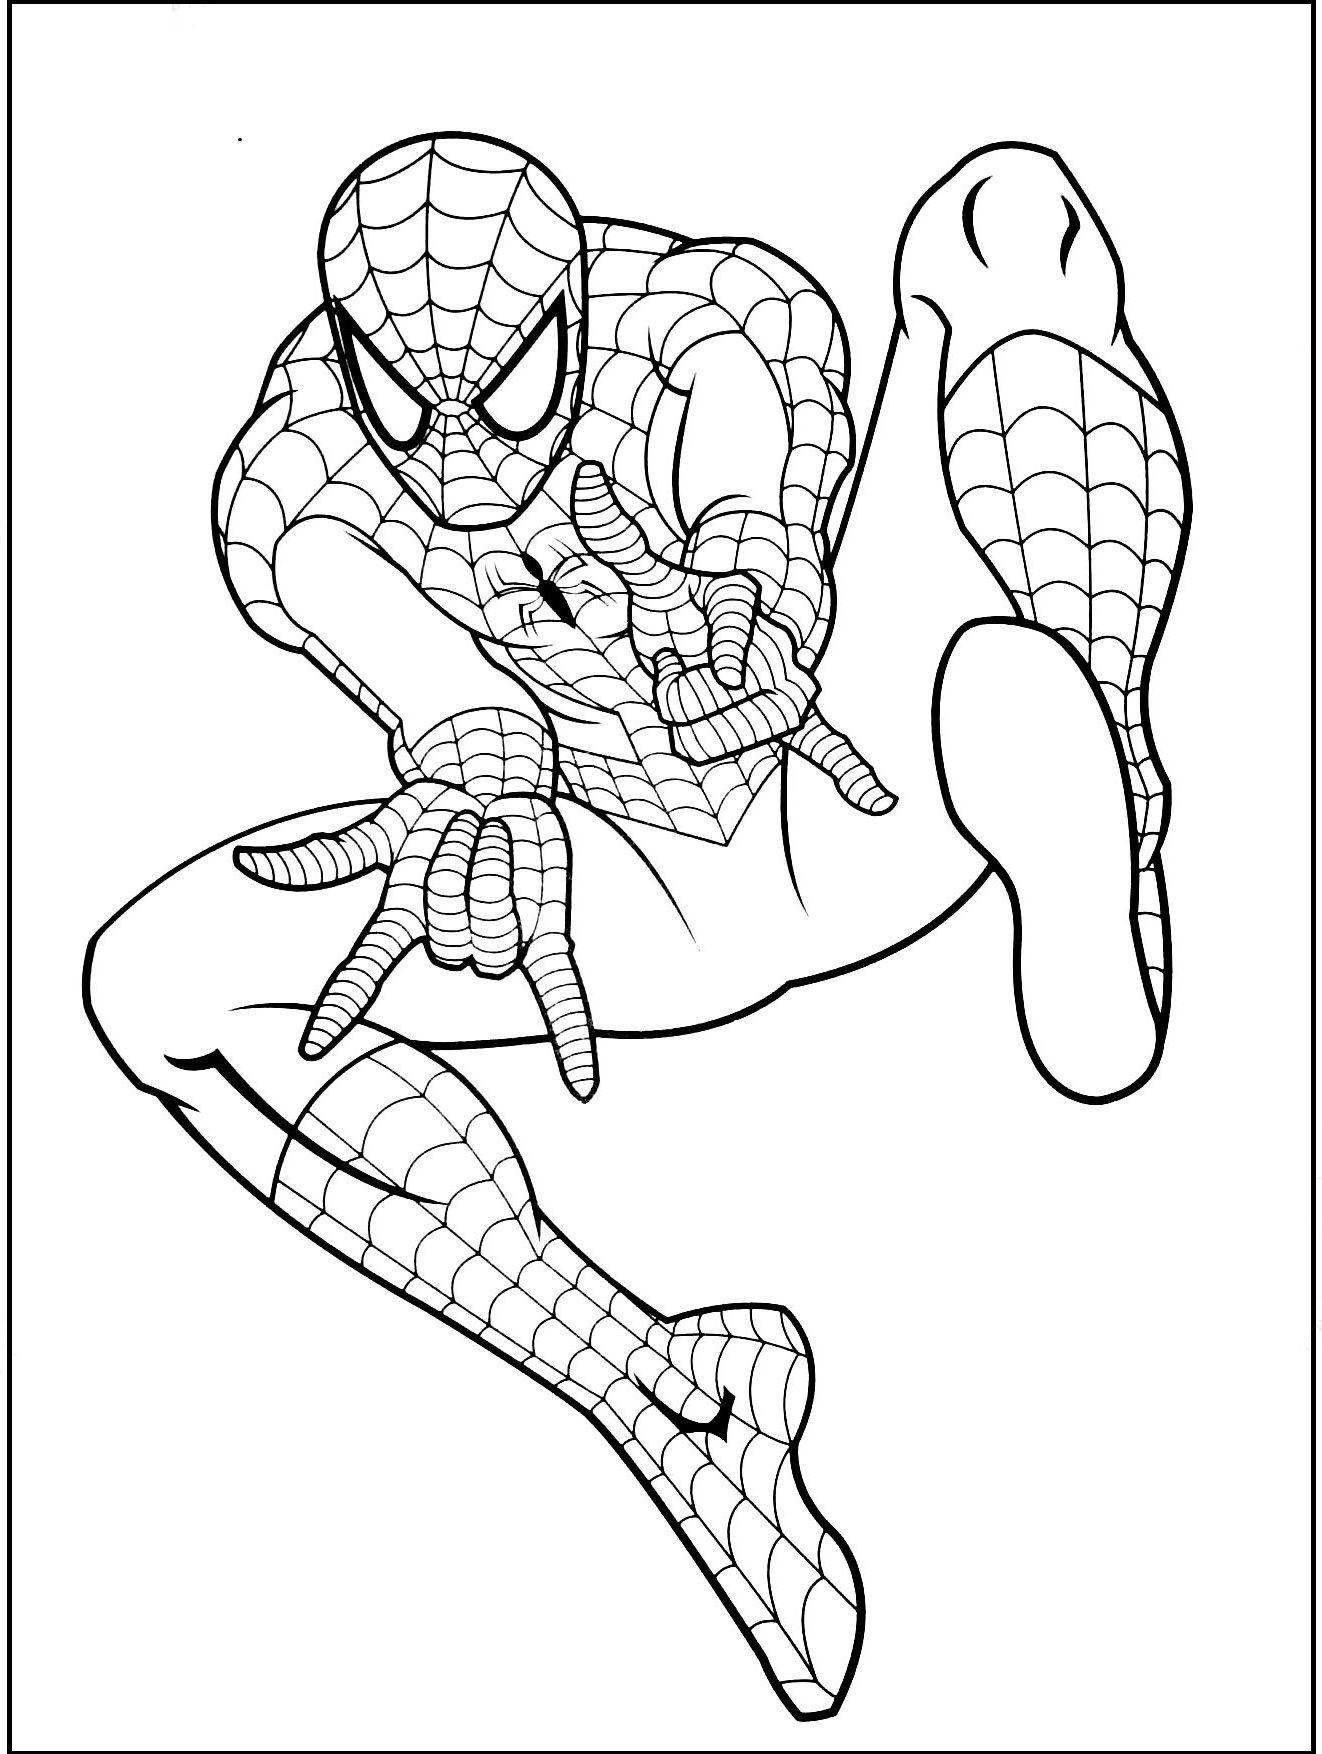 Spiderman Coloring Pages For Kids
 Spiderman Gratuit coloring picture for kids